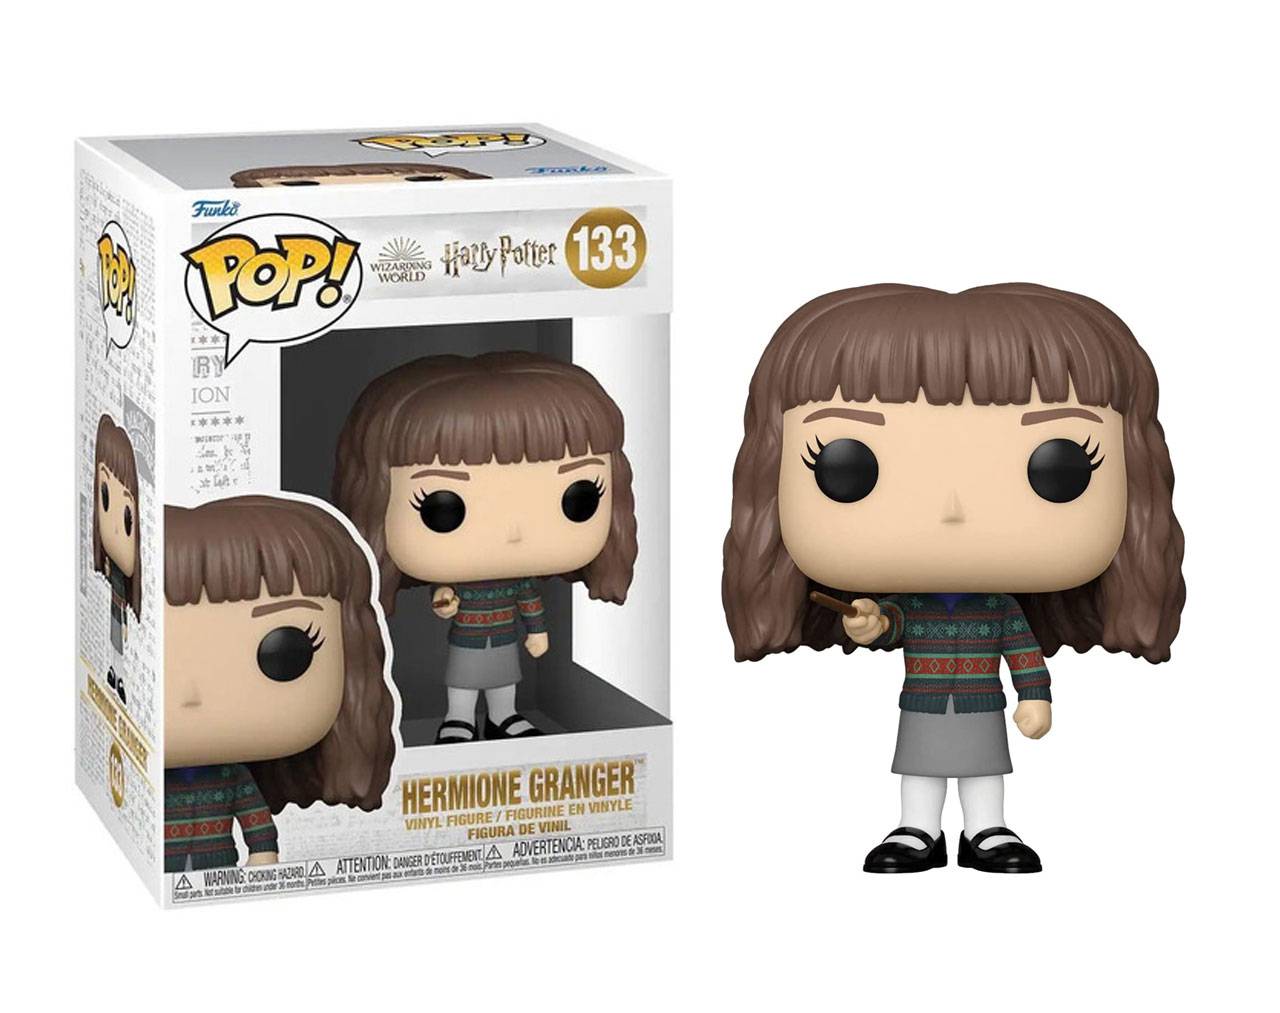 Hermione Granger (with Wand and Sweater) Pop! Vinyl